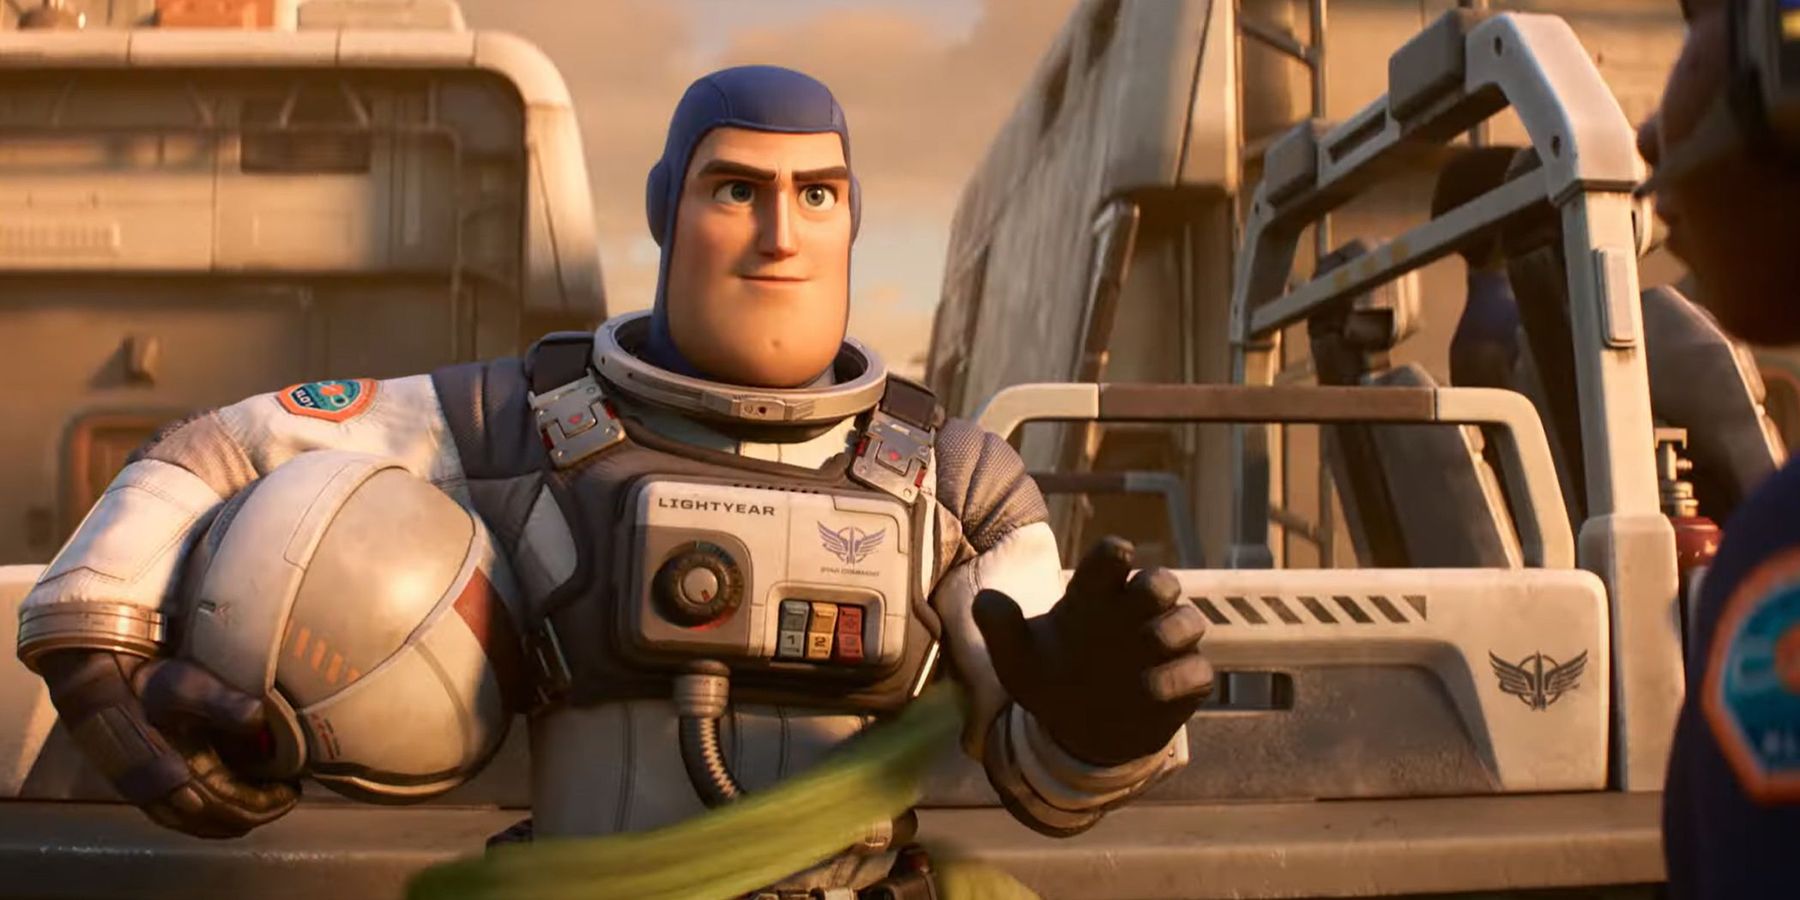 Lightyear trailer: The origin story of Buzz Lightyear from the 'Toy Story'  movies